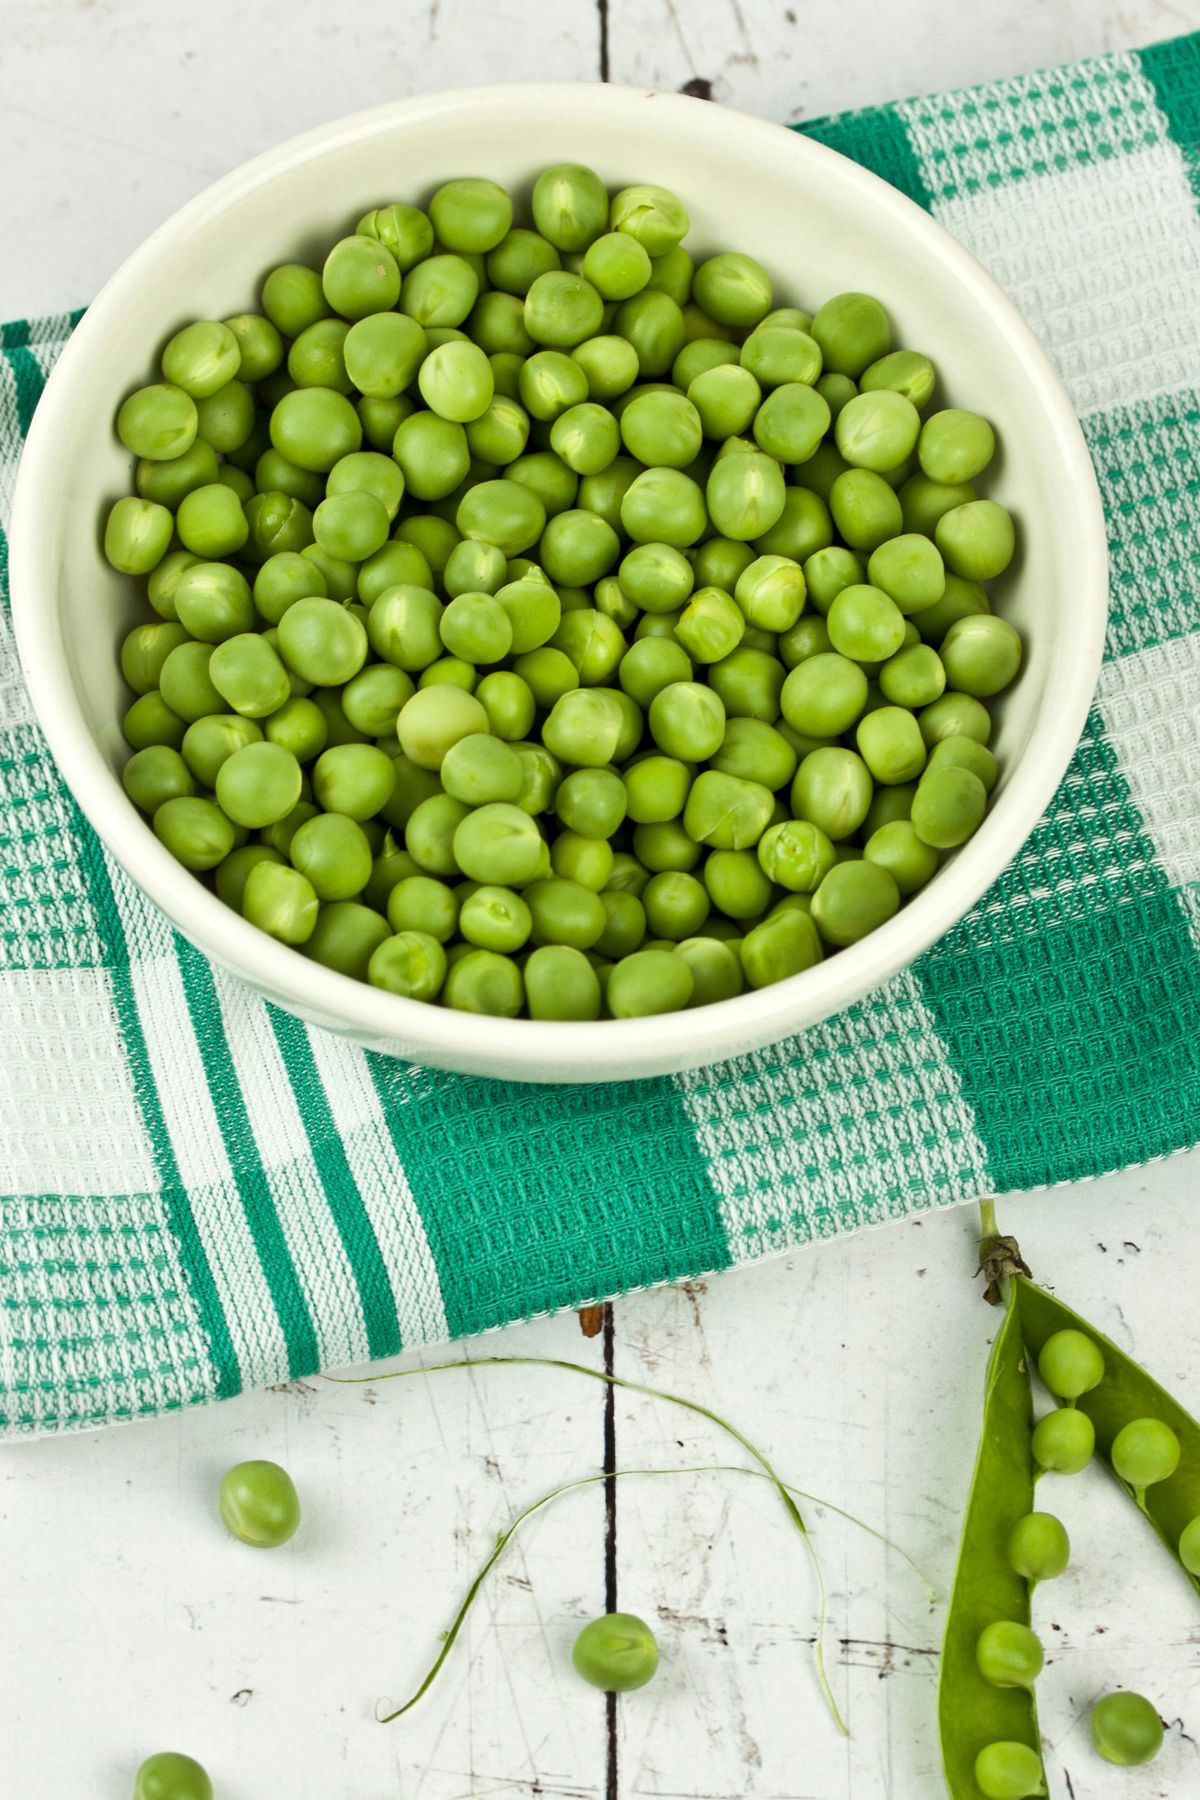 bowl of green peas on table with checkered towel.